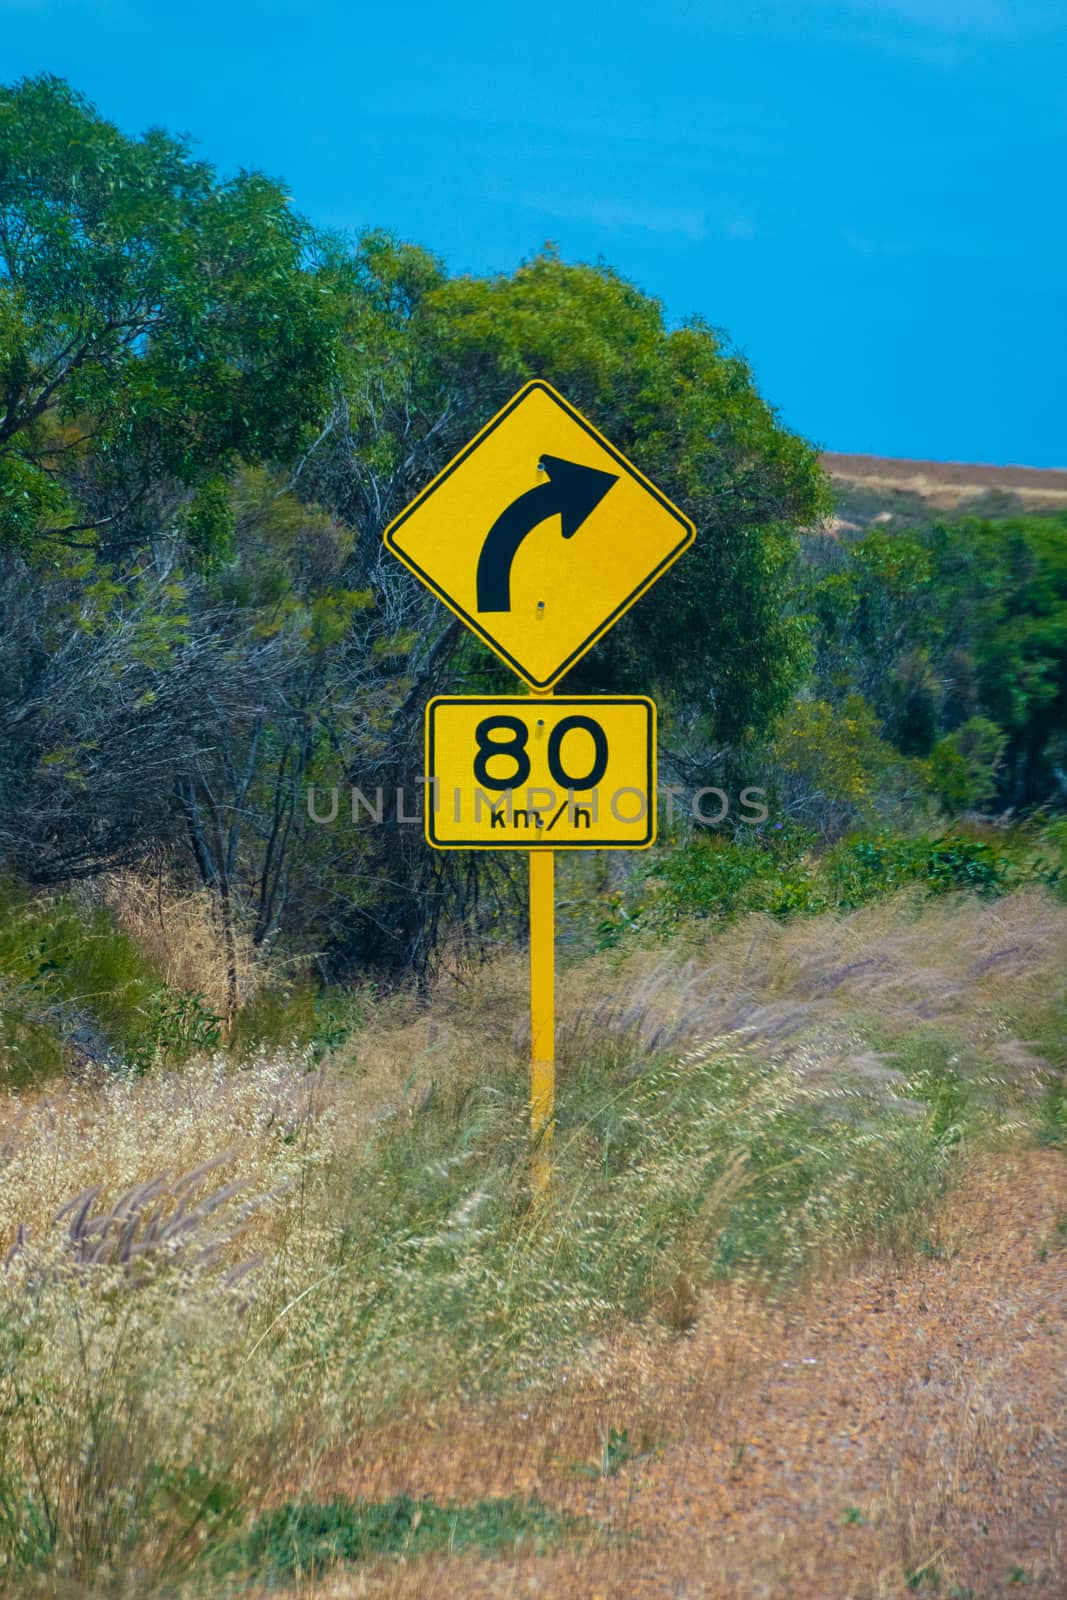 Street sign in Australia warning right curve ahead speed 80 with green trees in background by MXW_Stock